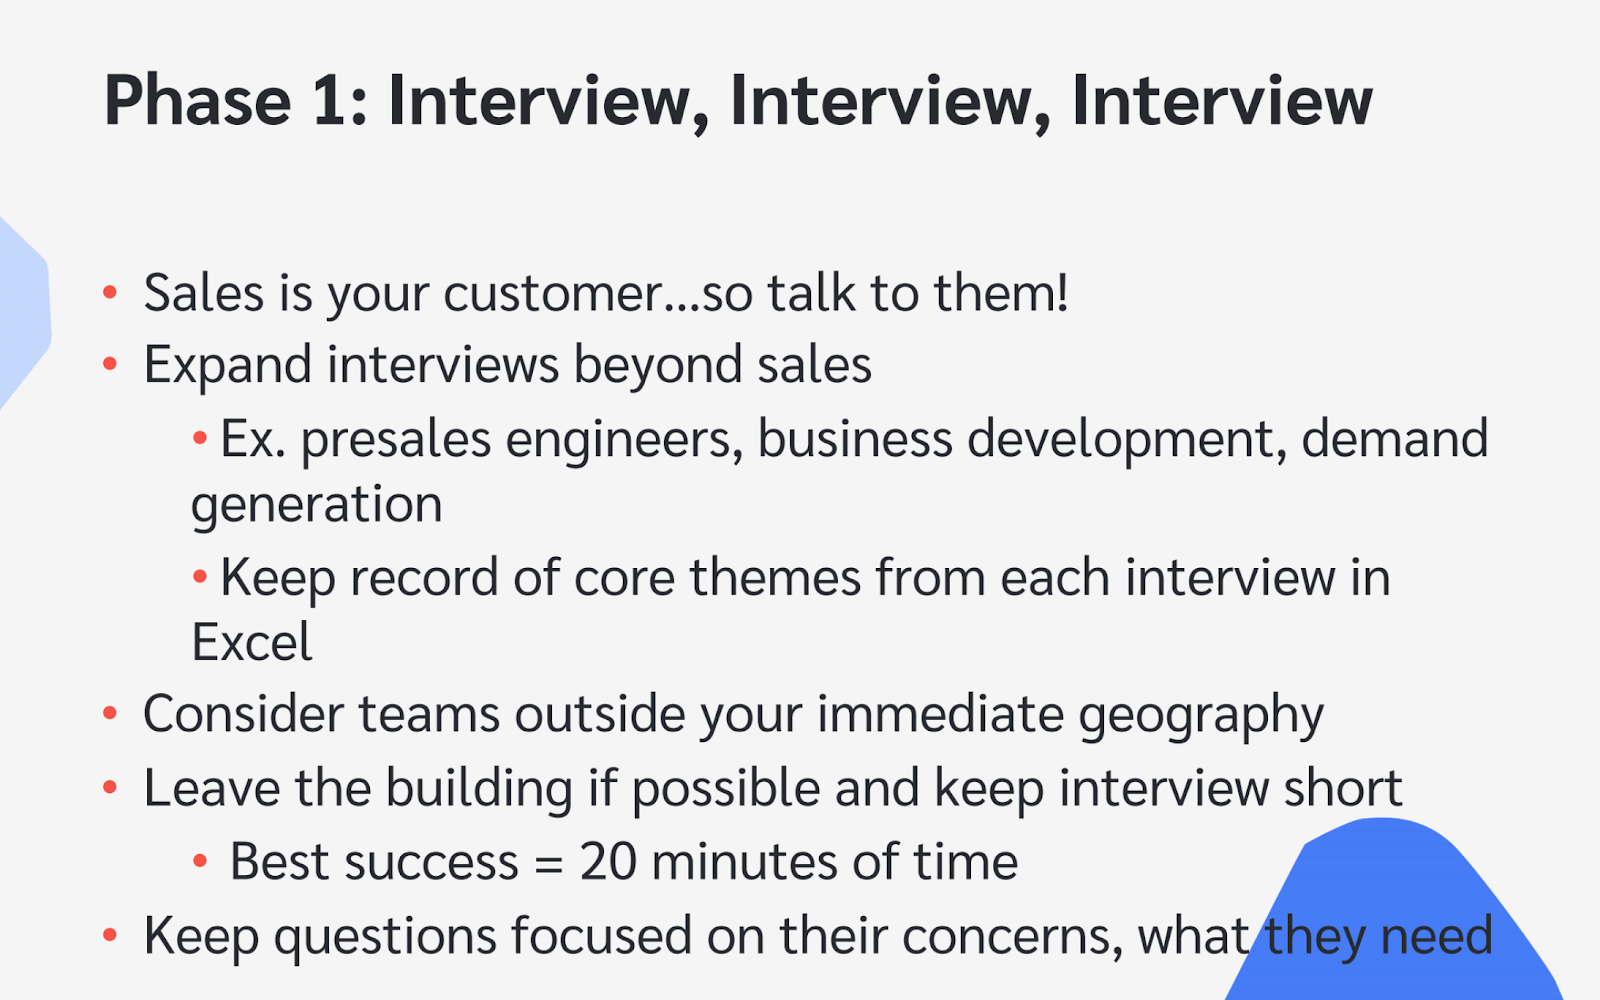 Interviews are key to unlocking insights for sales enablement.